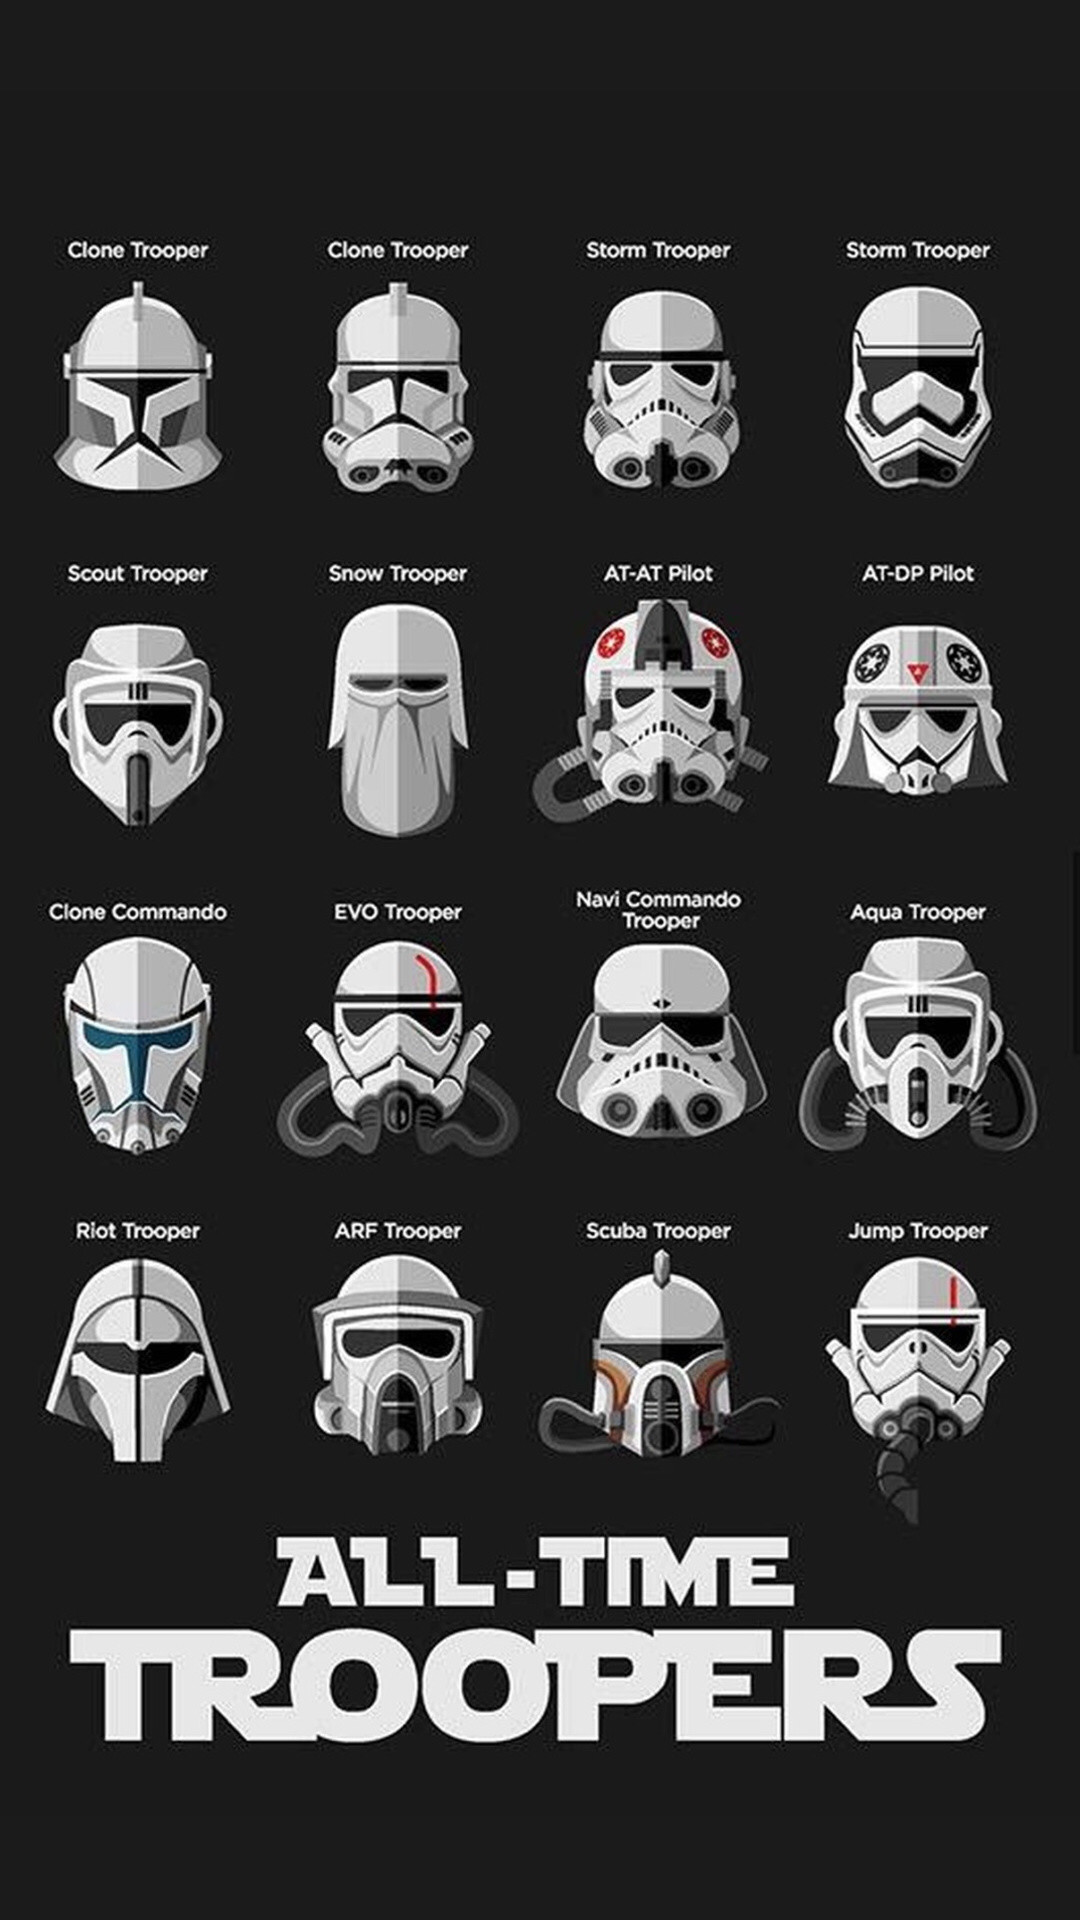 All-time storm troopers